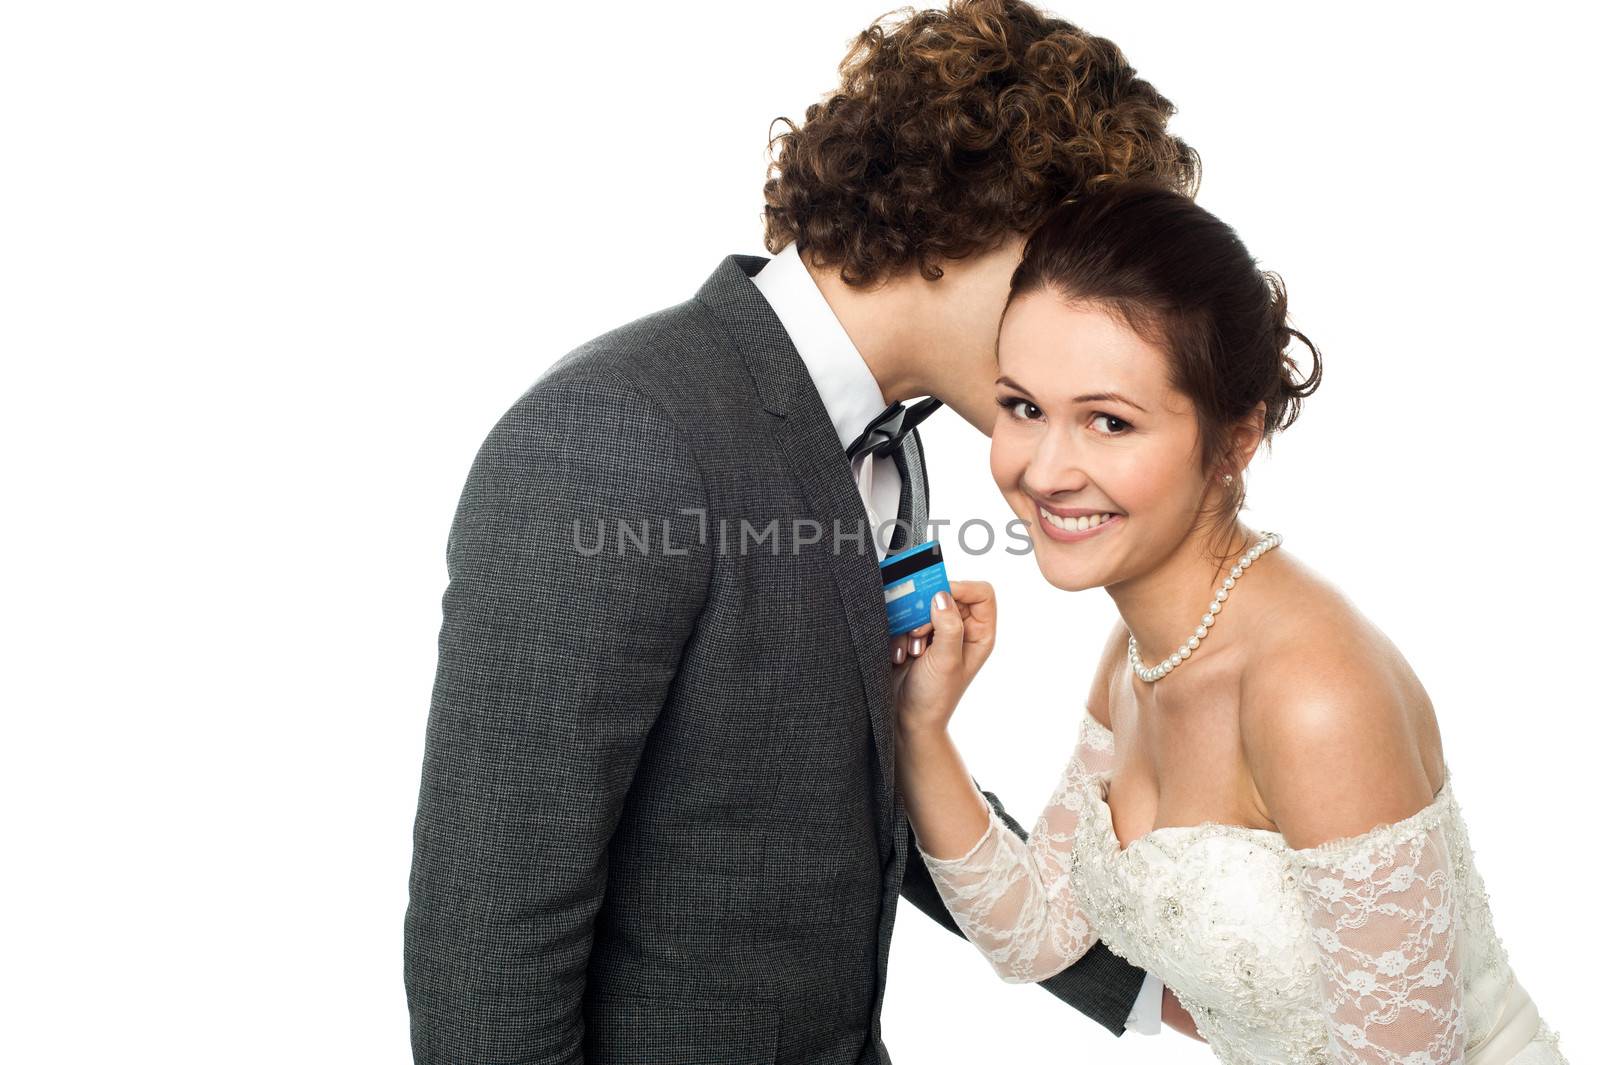 Groom whispering sweet nothings by stockyimages